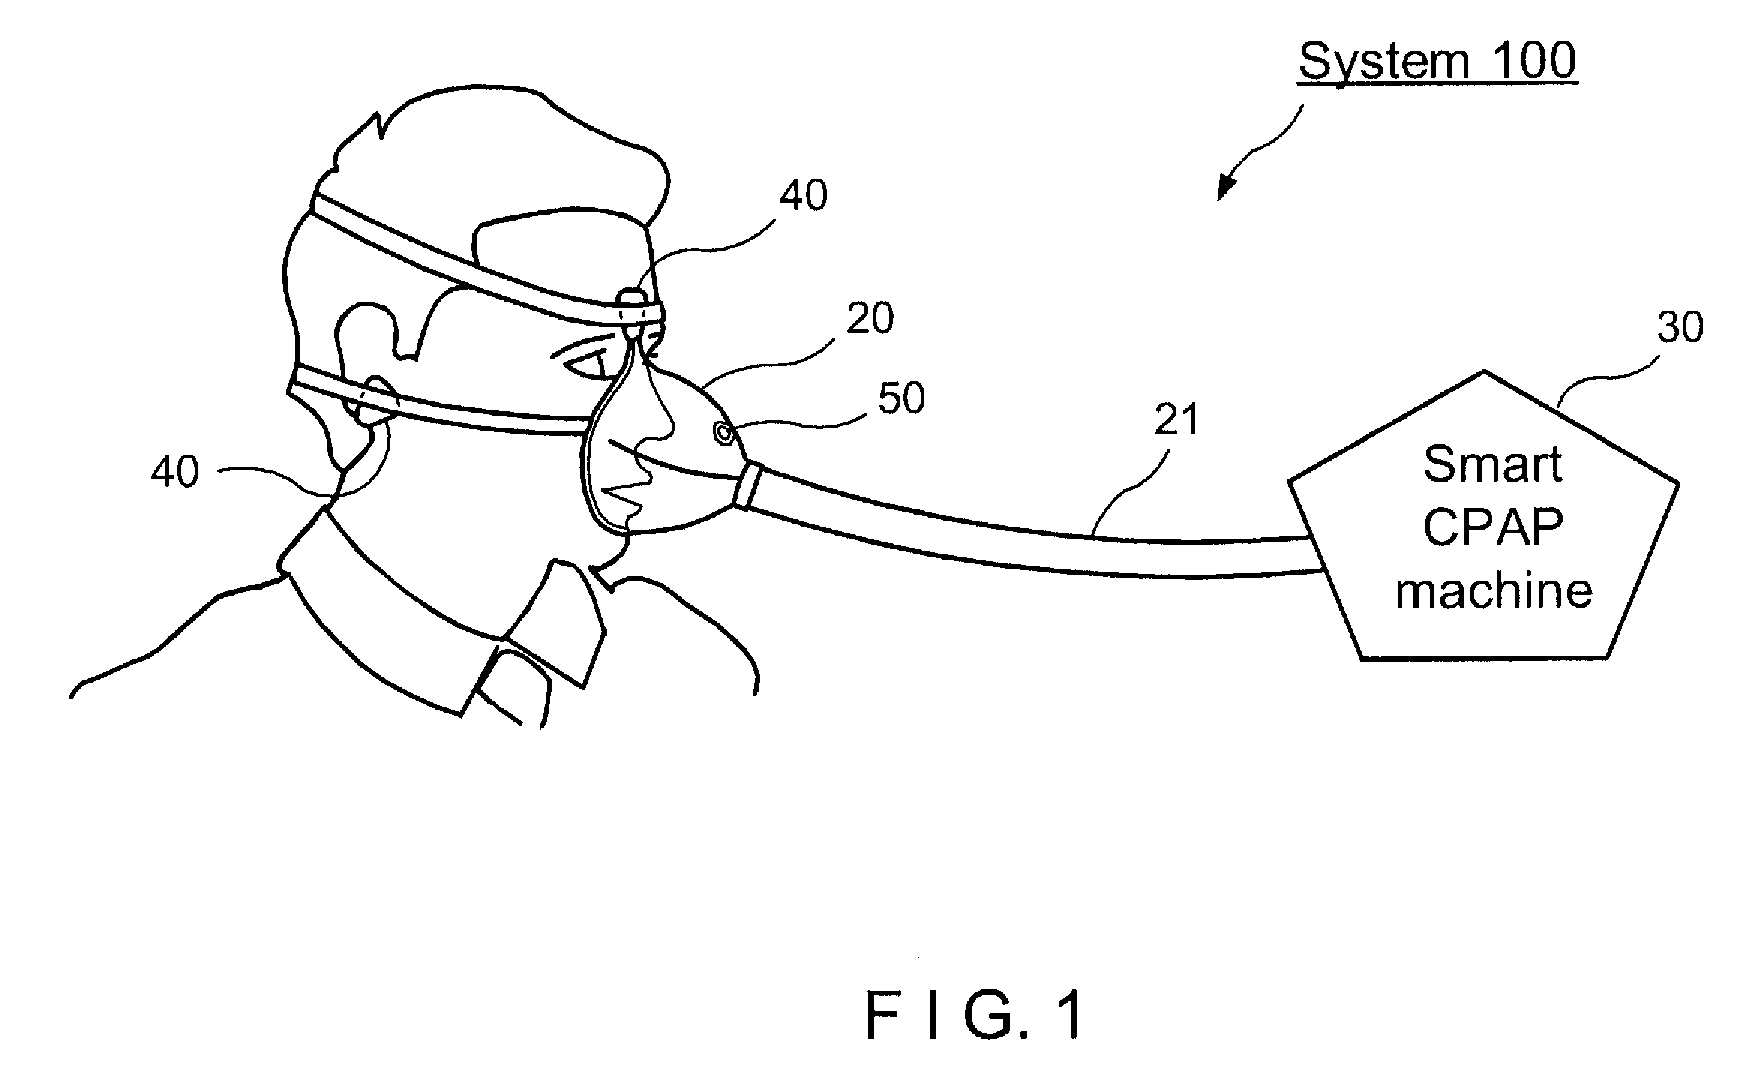 System and method of monitoring respiratory airflow and oxygen concentration